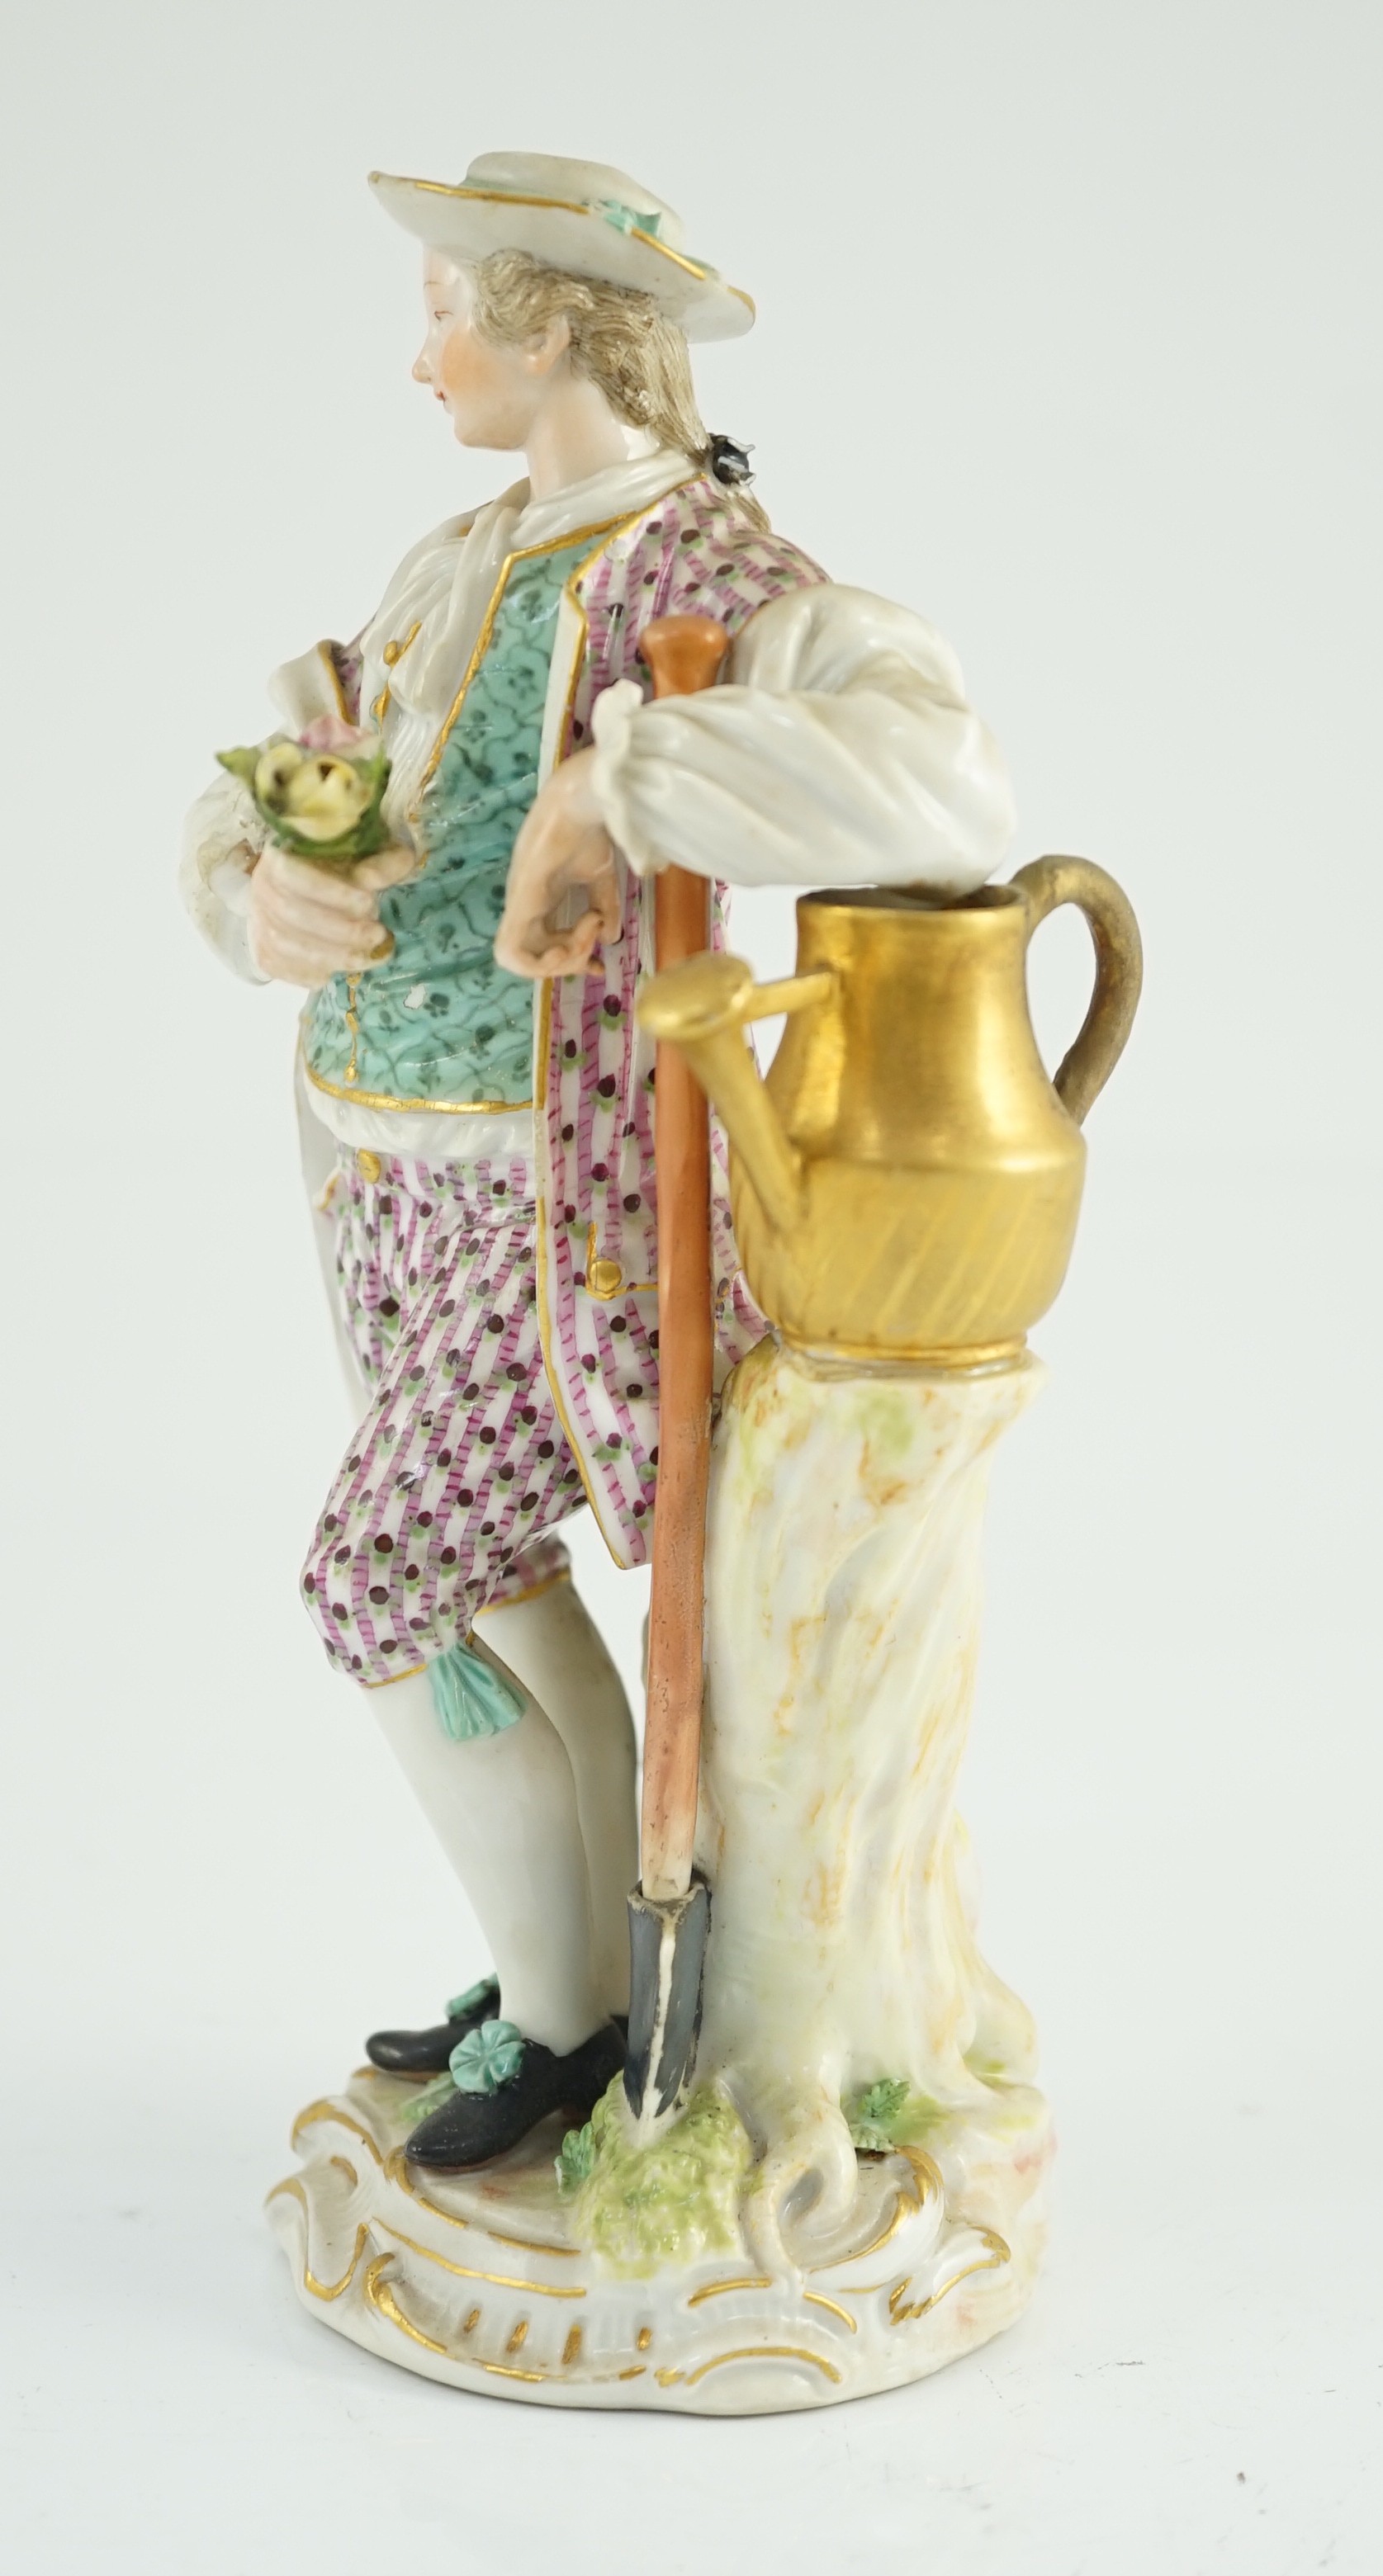 A Meissen figure of a gardener, c.1770, modelled by Michel Victor Acier, holding a posy of flowers - Image 2 of 7